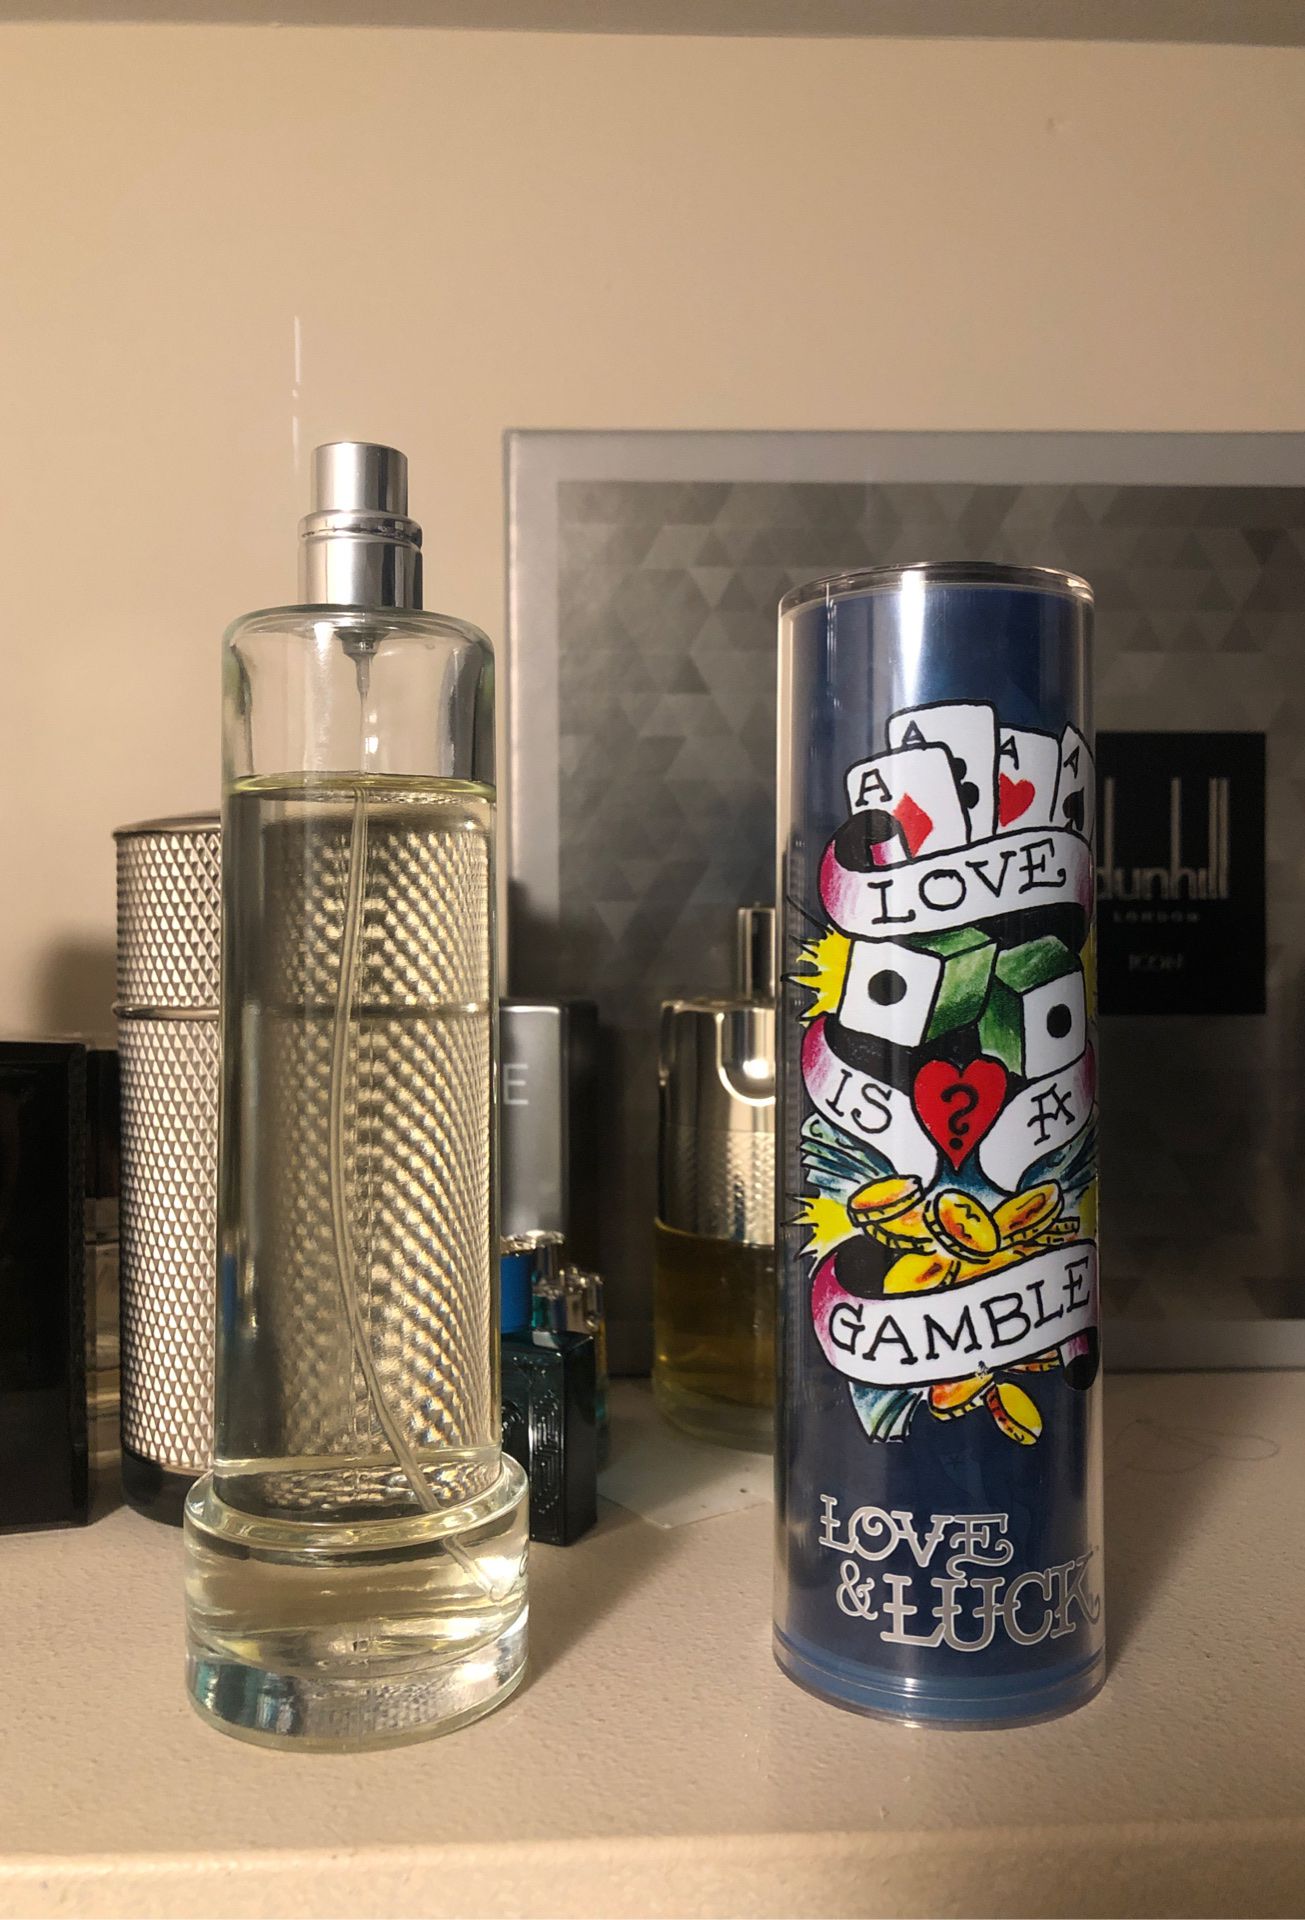 Men’s cologne/fragrance “Ed Hardy Love is a gamble”